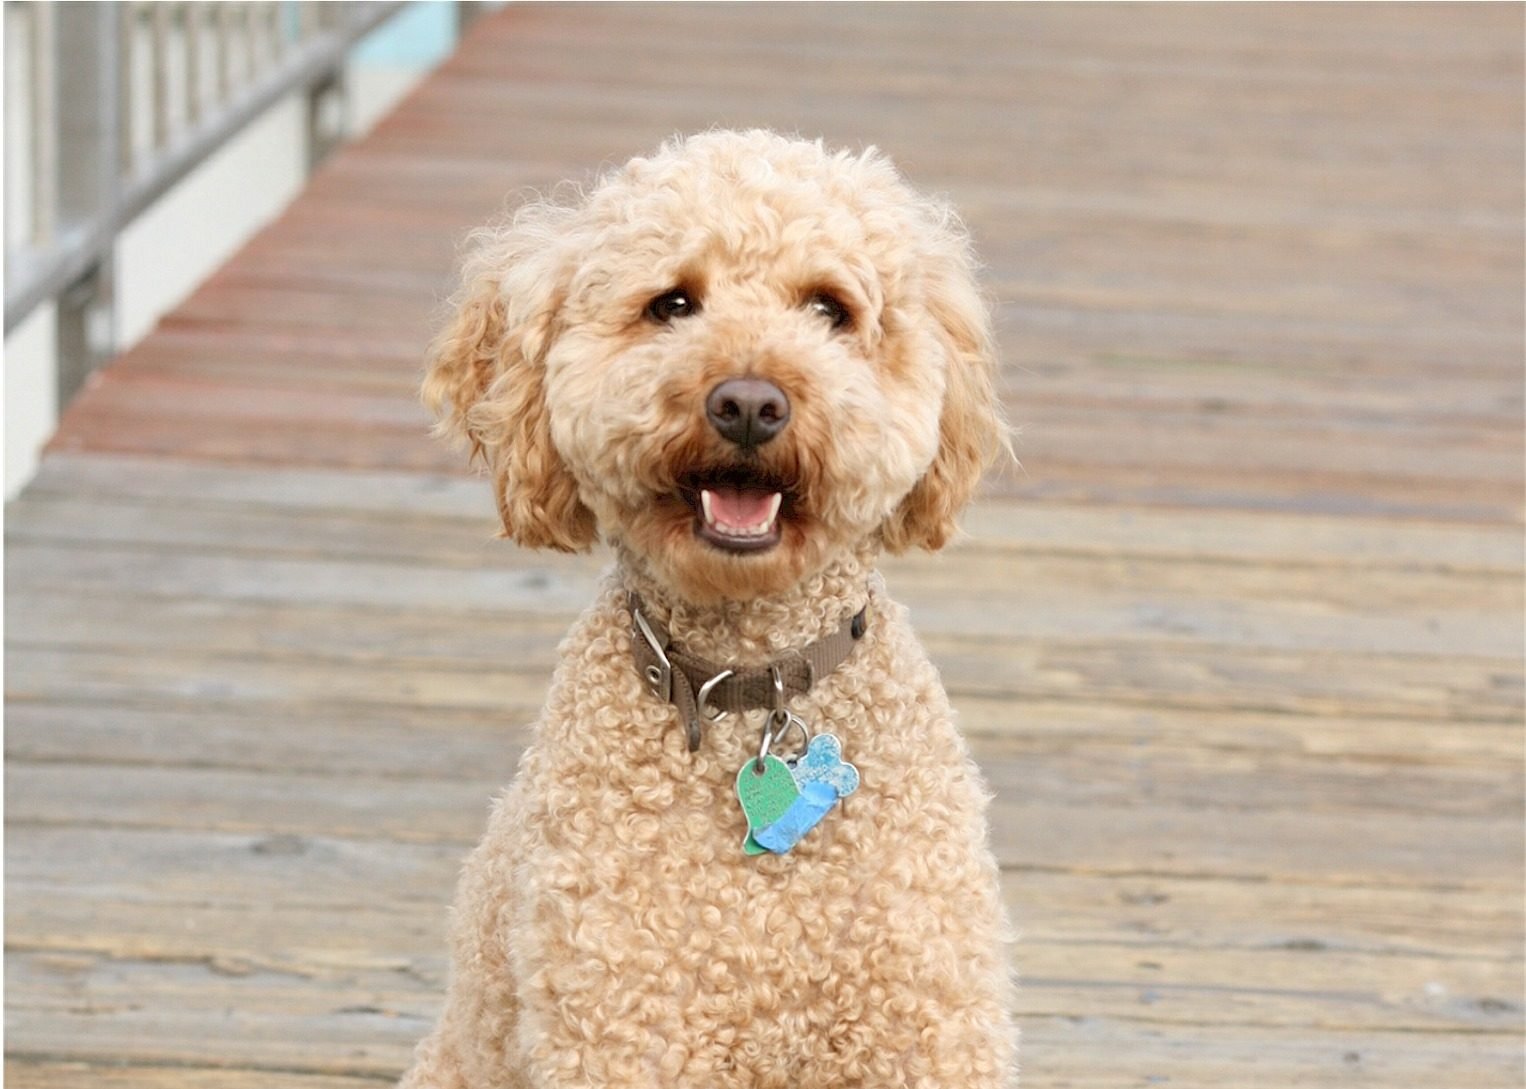 Top Labradoodle Haircut Styles for 2019 | The Dog People by Rover.com